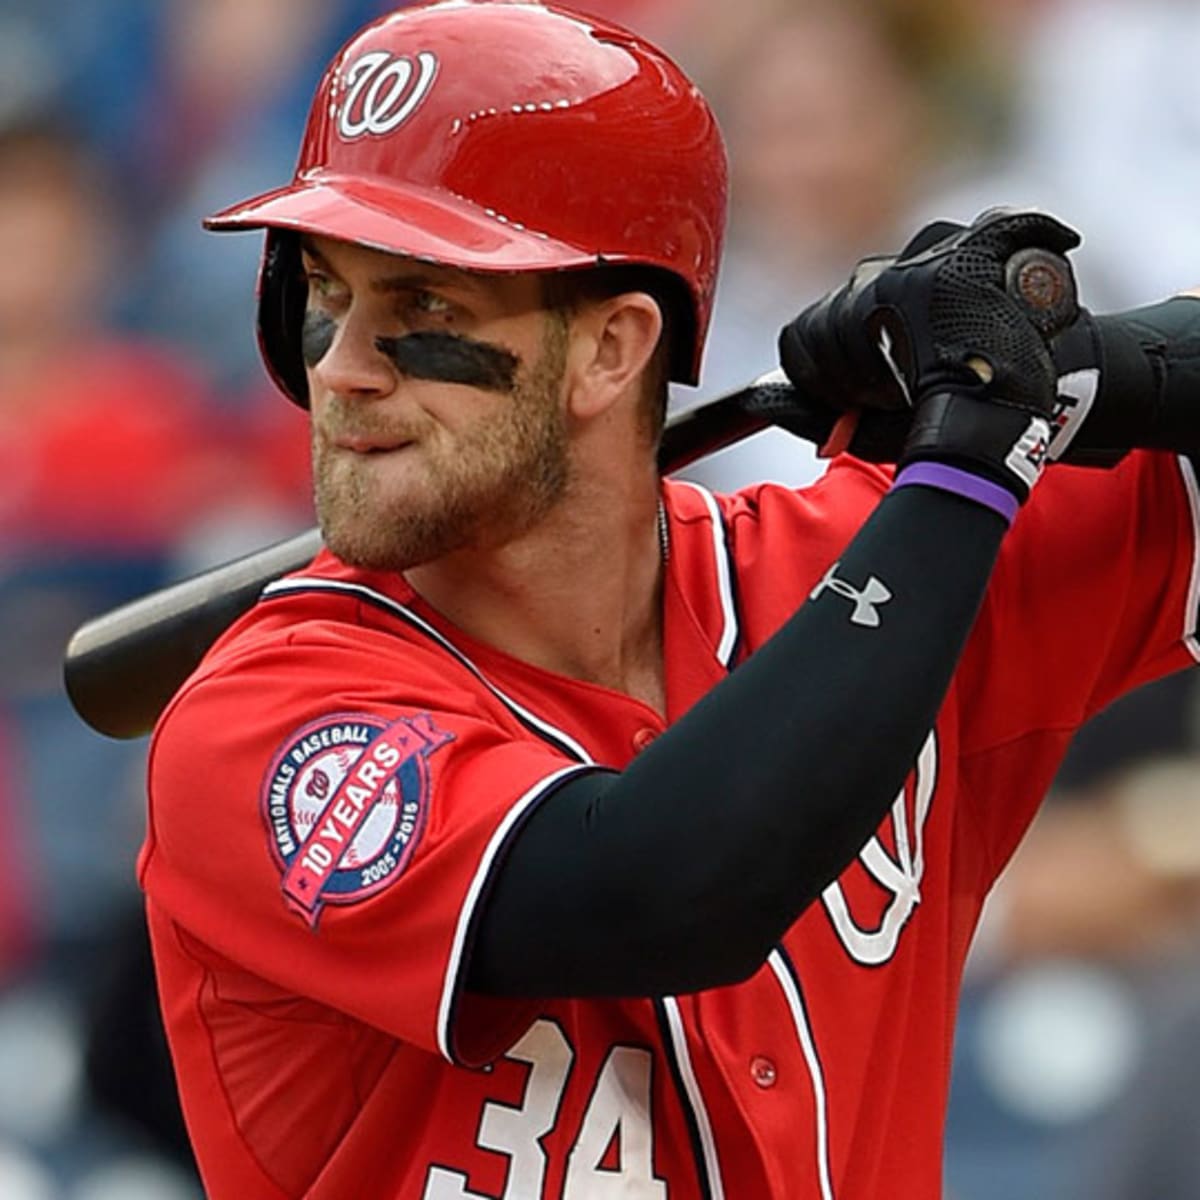 Bryce Harper may not participate in the 2015 Home Run Derby - NBC Sports